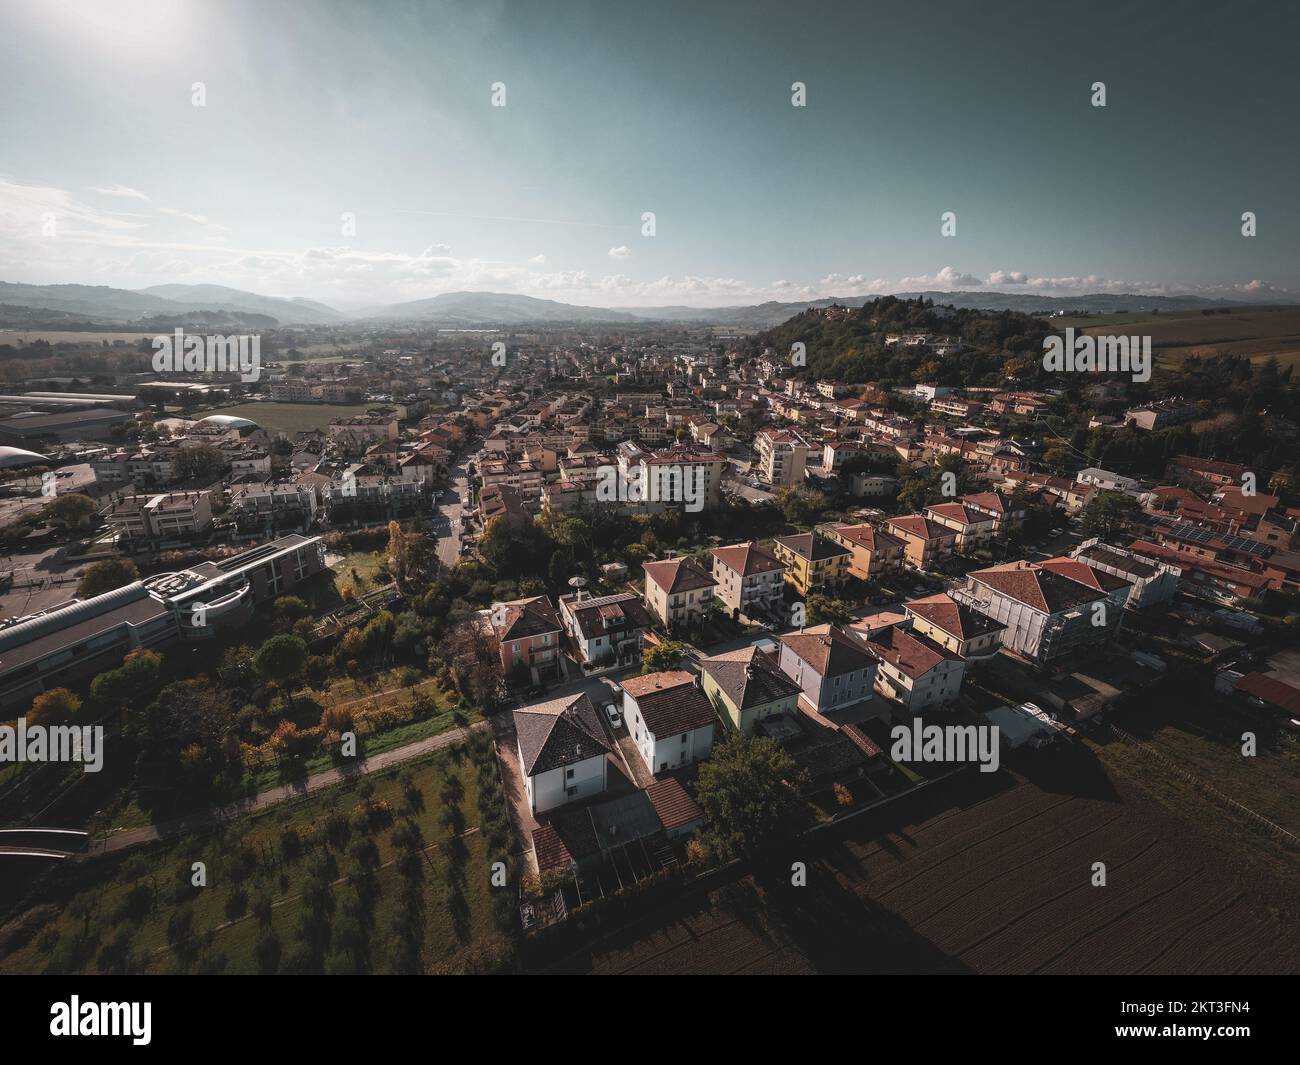 Italy, November 26, 2022: aerial view of village of montecchio in the province of Pesaro and Urbino in the Marche region Stock Photo